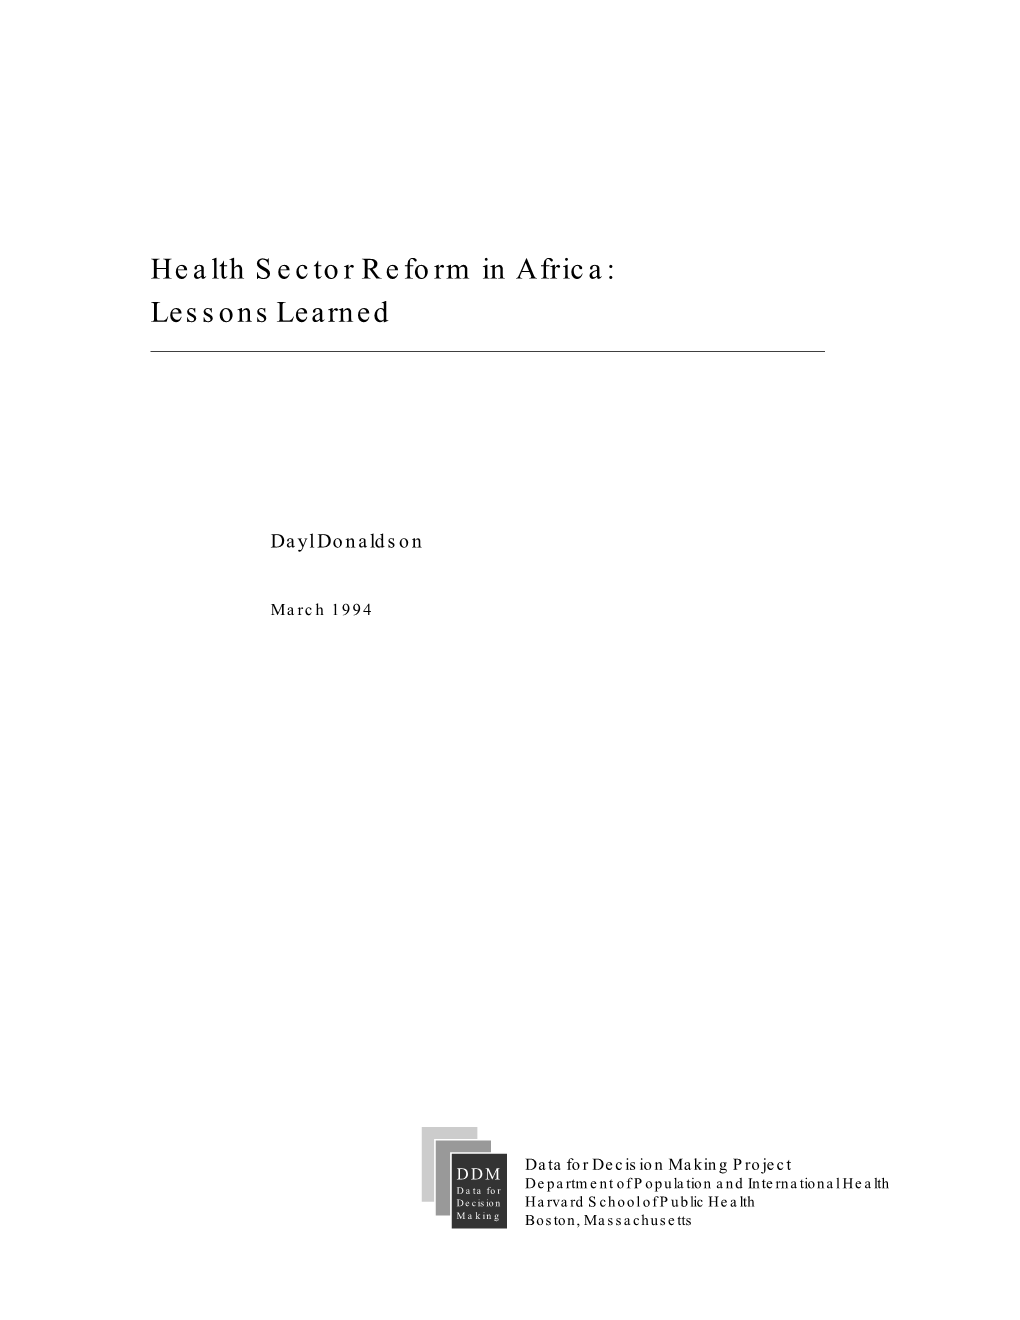 Health Sector Reform in Africa: Lessons Learned